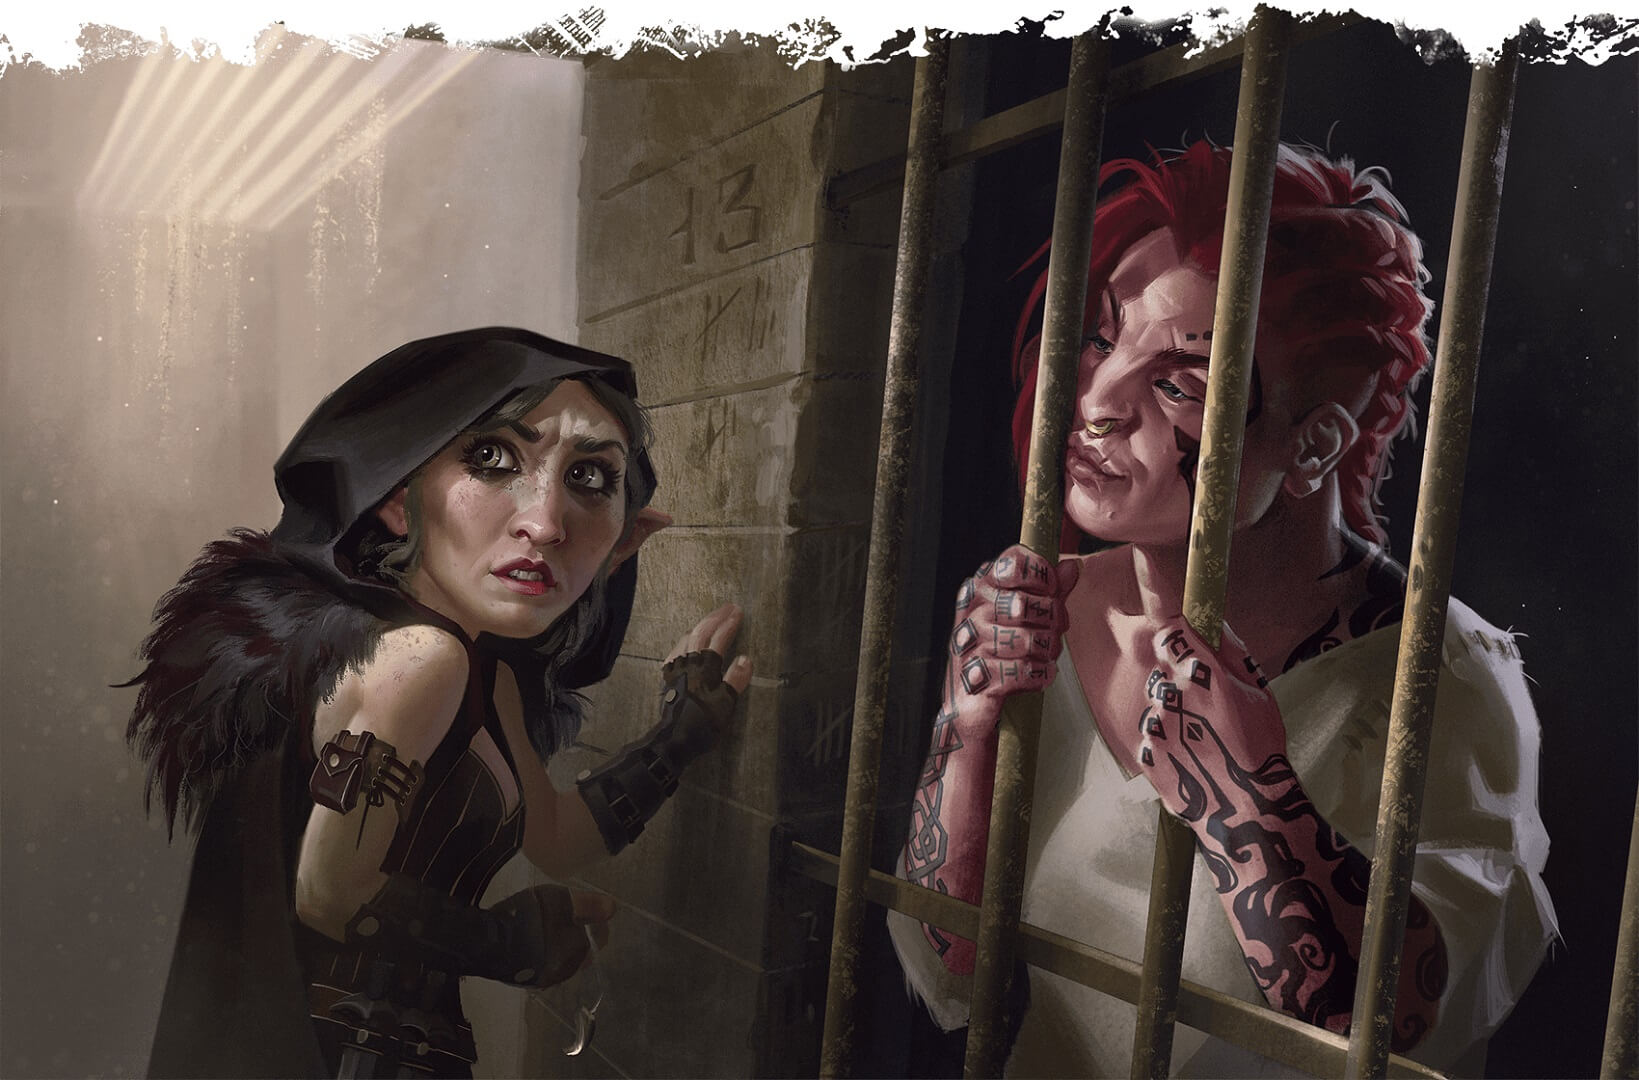 A party member meeting Prisoner 13 in their titular adventure in Keys From The Golden Vault